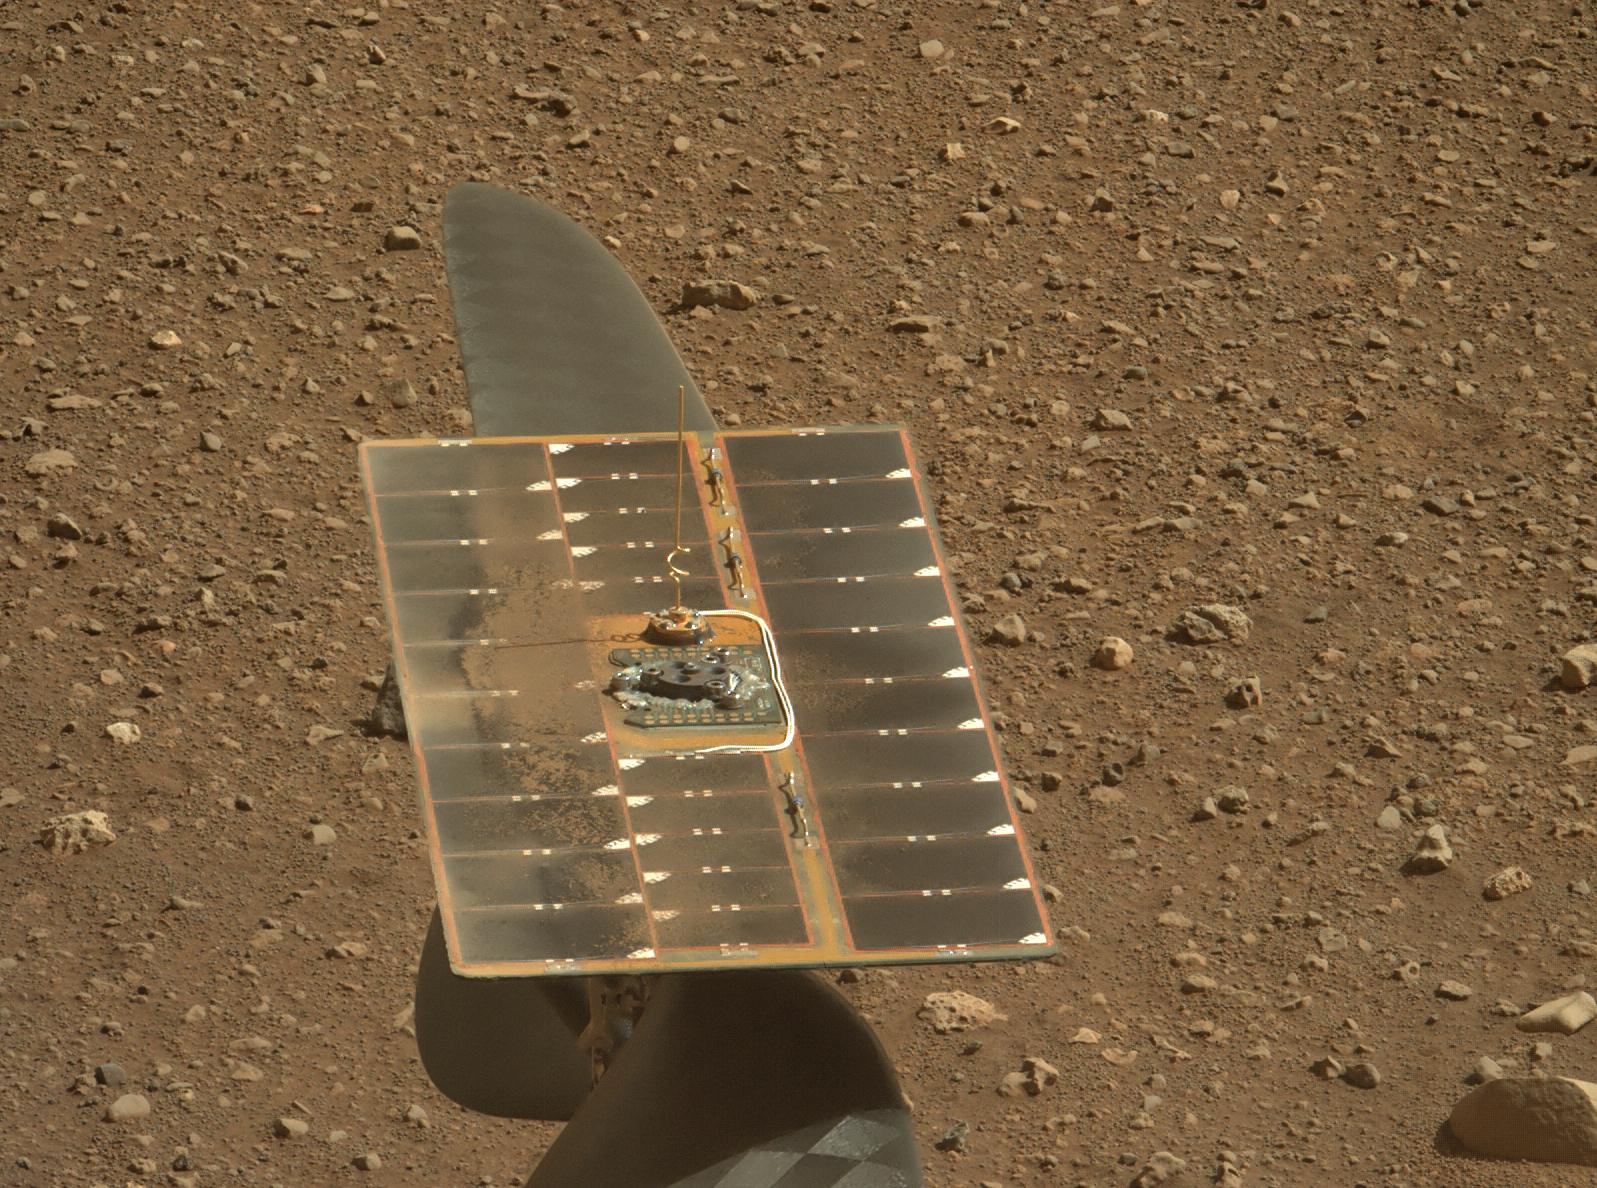 The solar panel of NASA's Ingenuity Mars Helicopter's solar panel as seen by Mastcam-Z, a pair of zoomable cameras aboard NASA's Perseverance Mars rover.